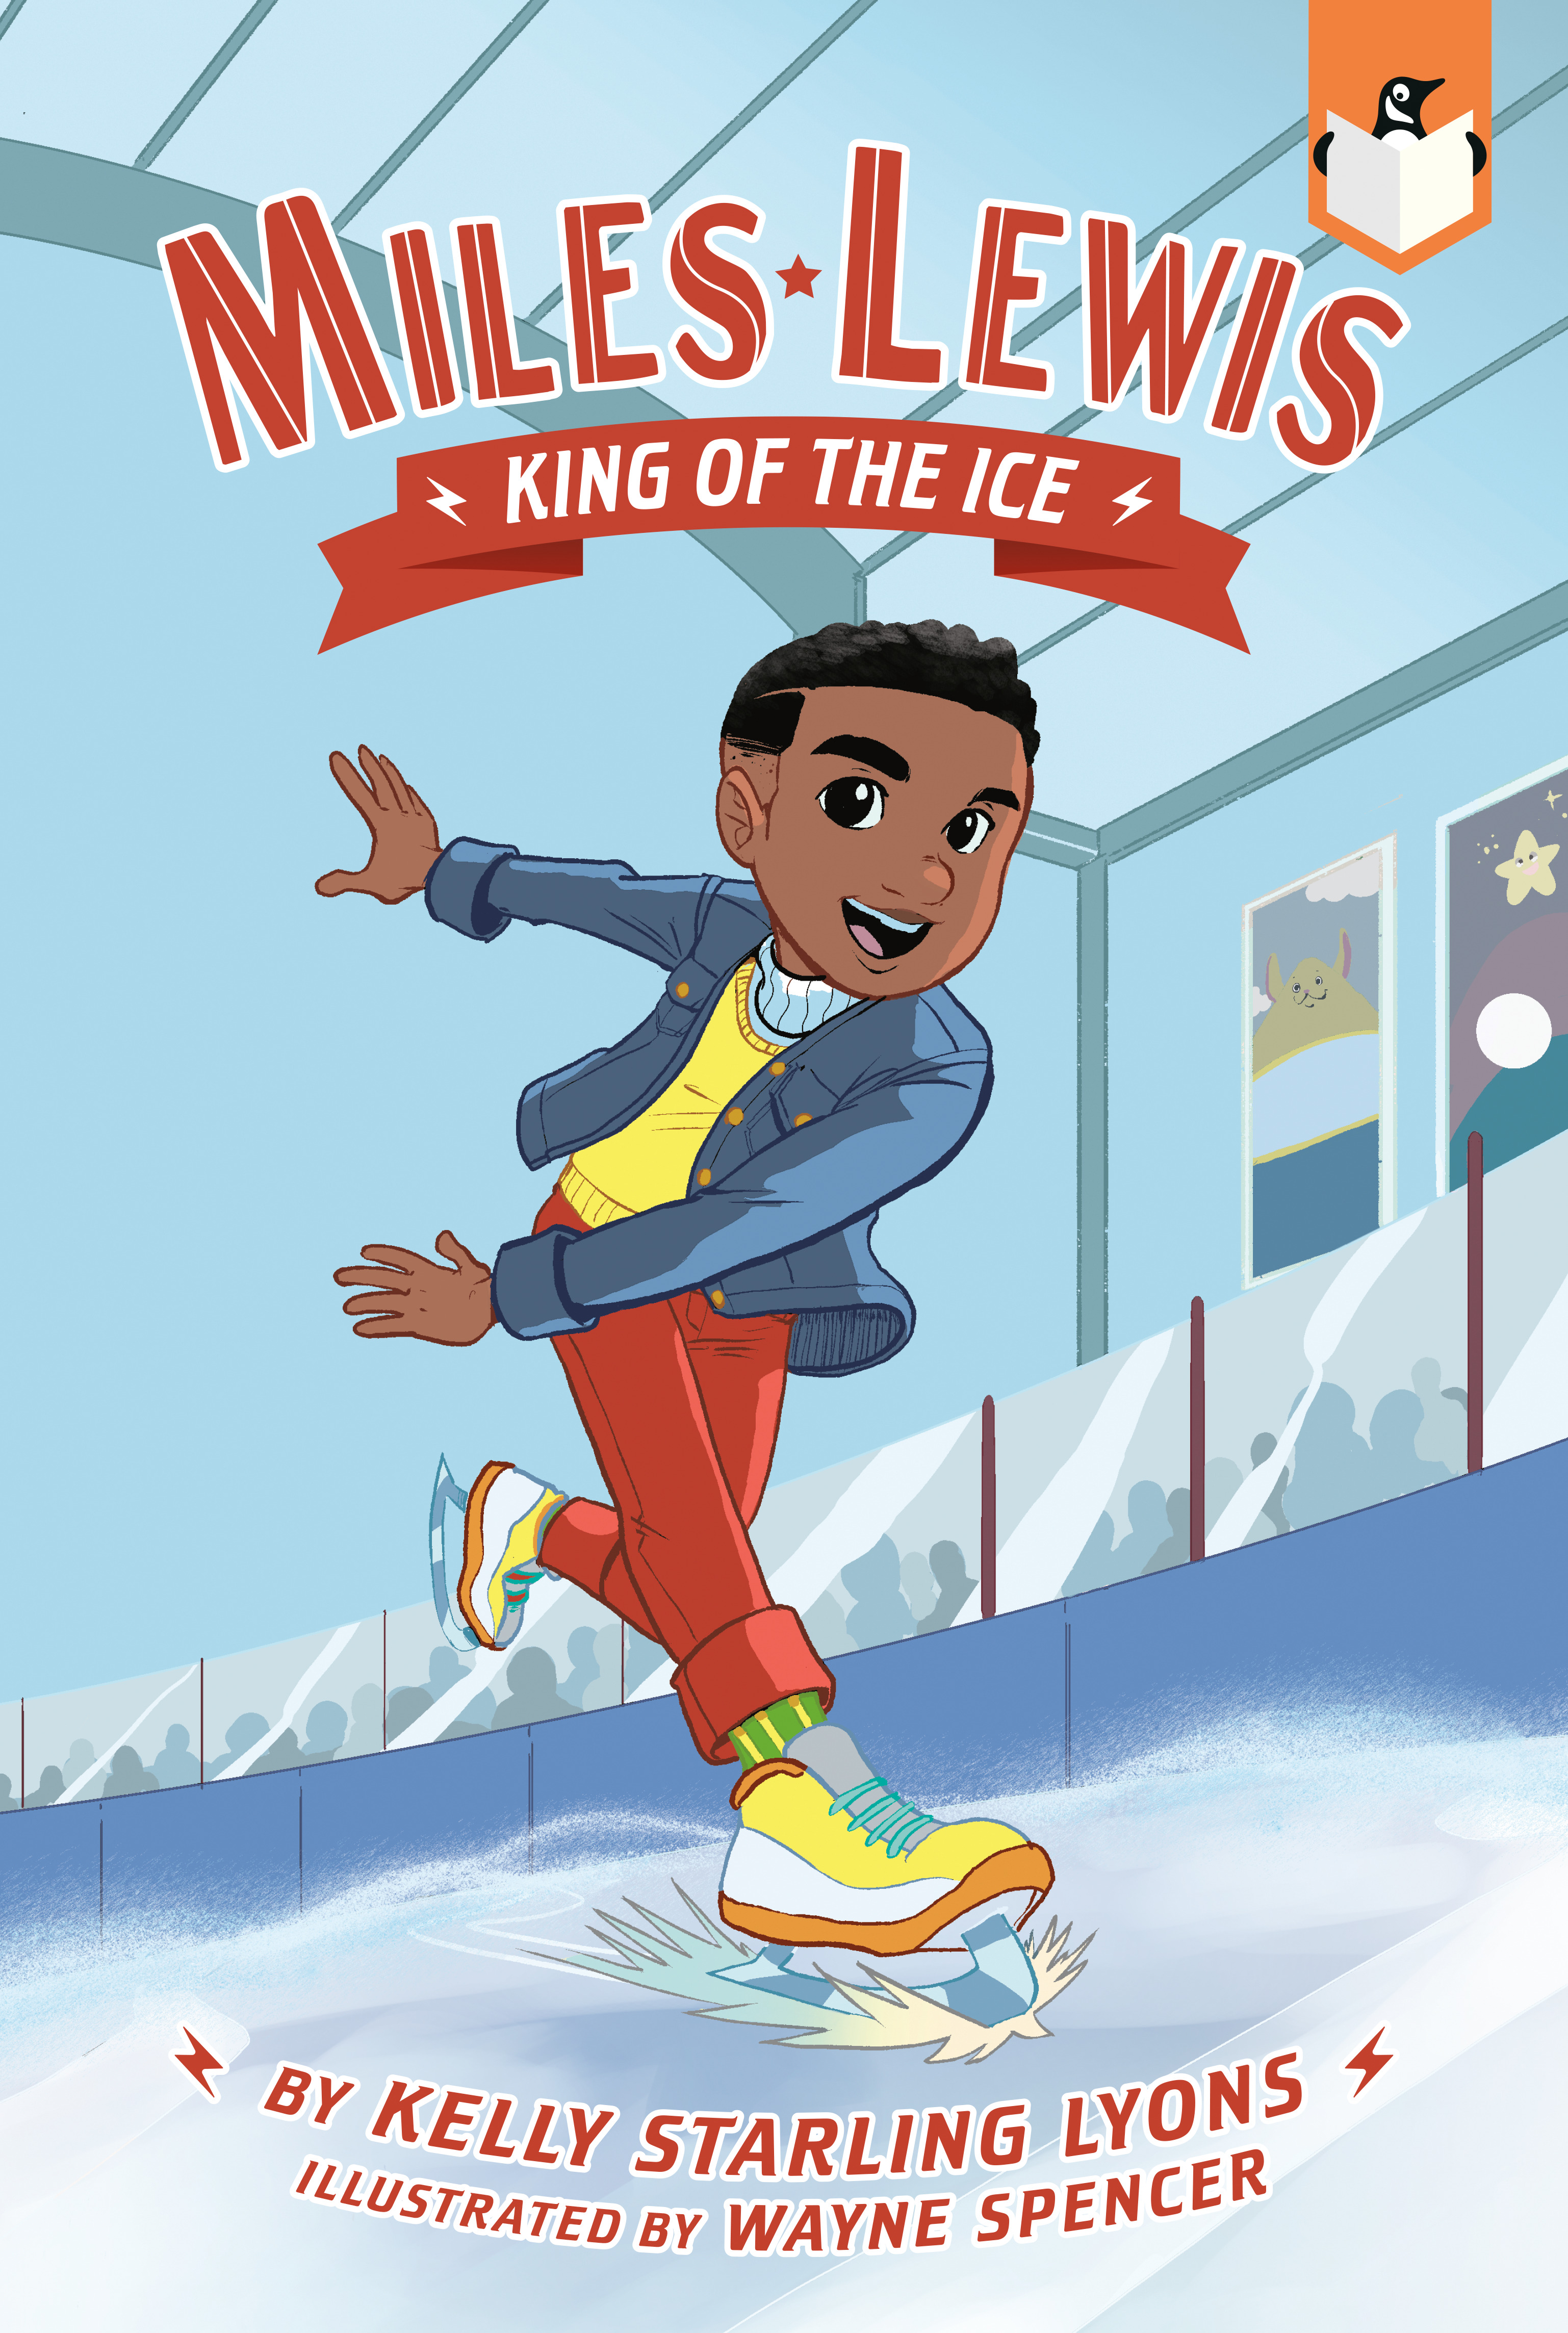 Miles Lewis #1 - King of the Ice | Starling Lyons, Kelly